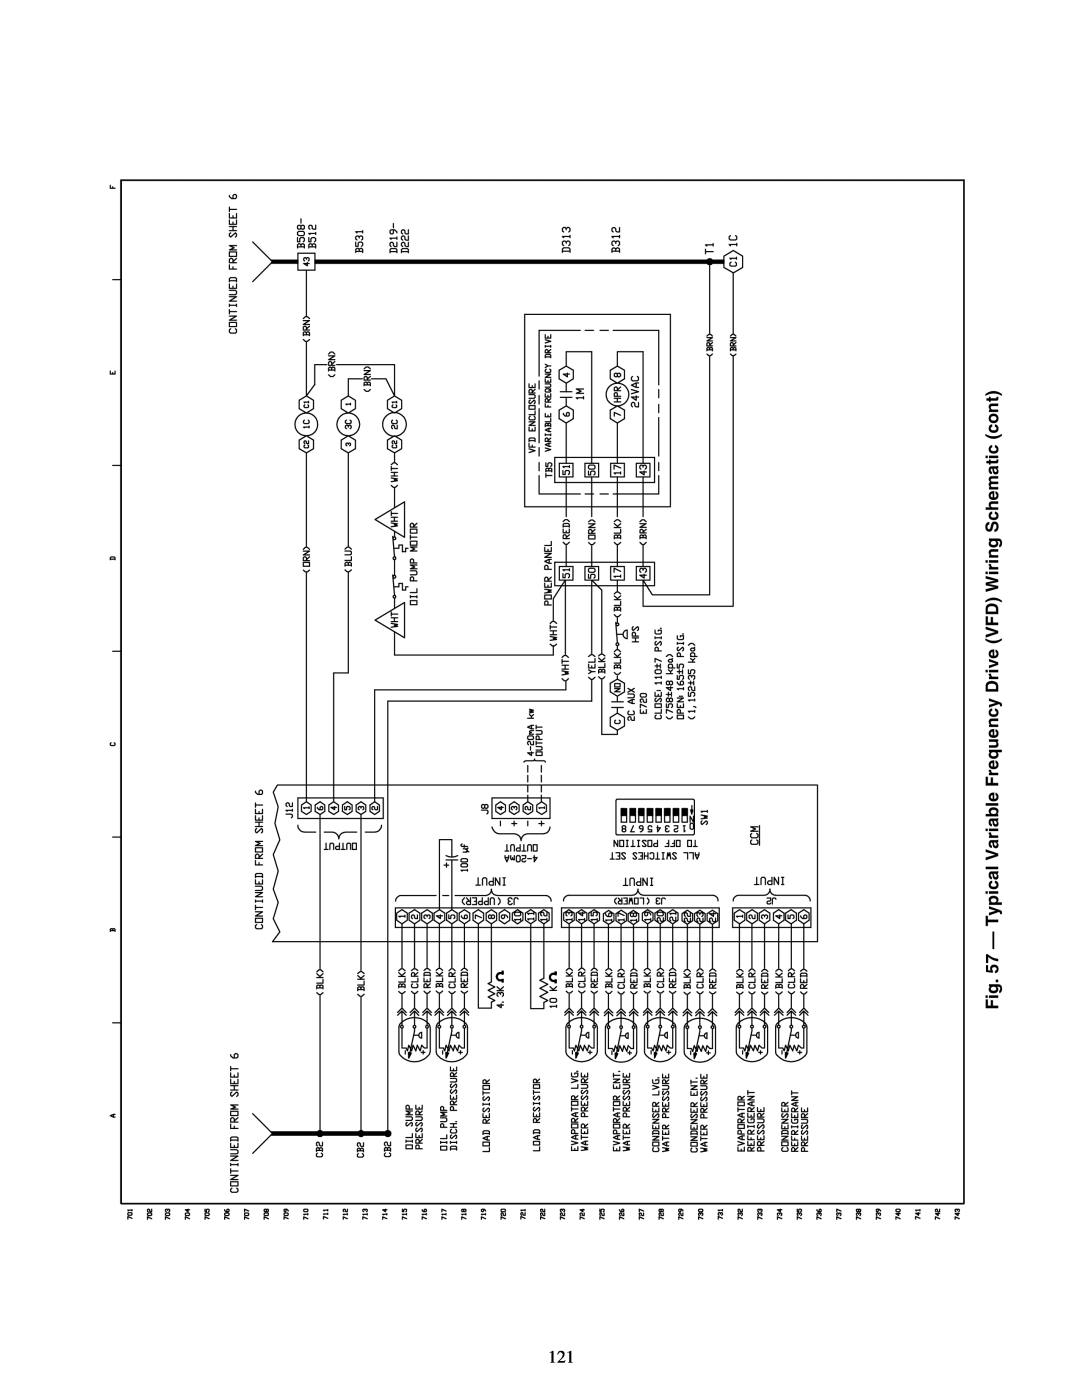 Carrier XRV, 19XR specifications Typical Variable Frequency Drive VFD Wiring Schematic cont 